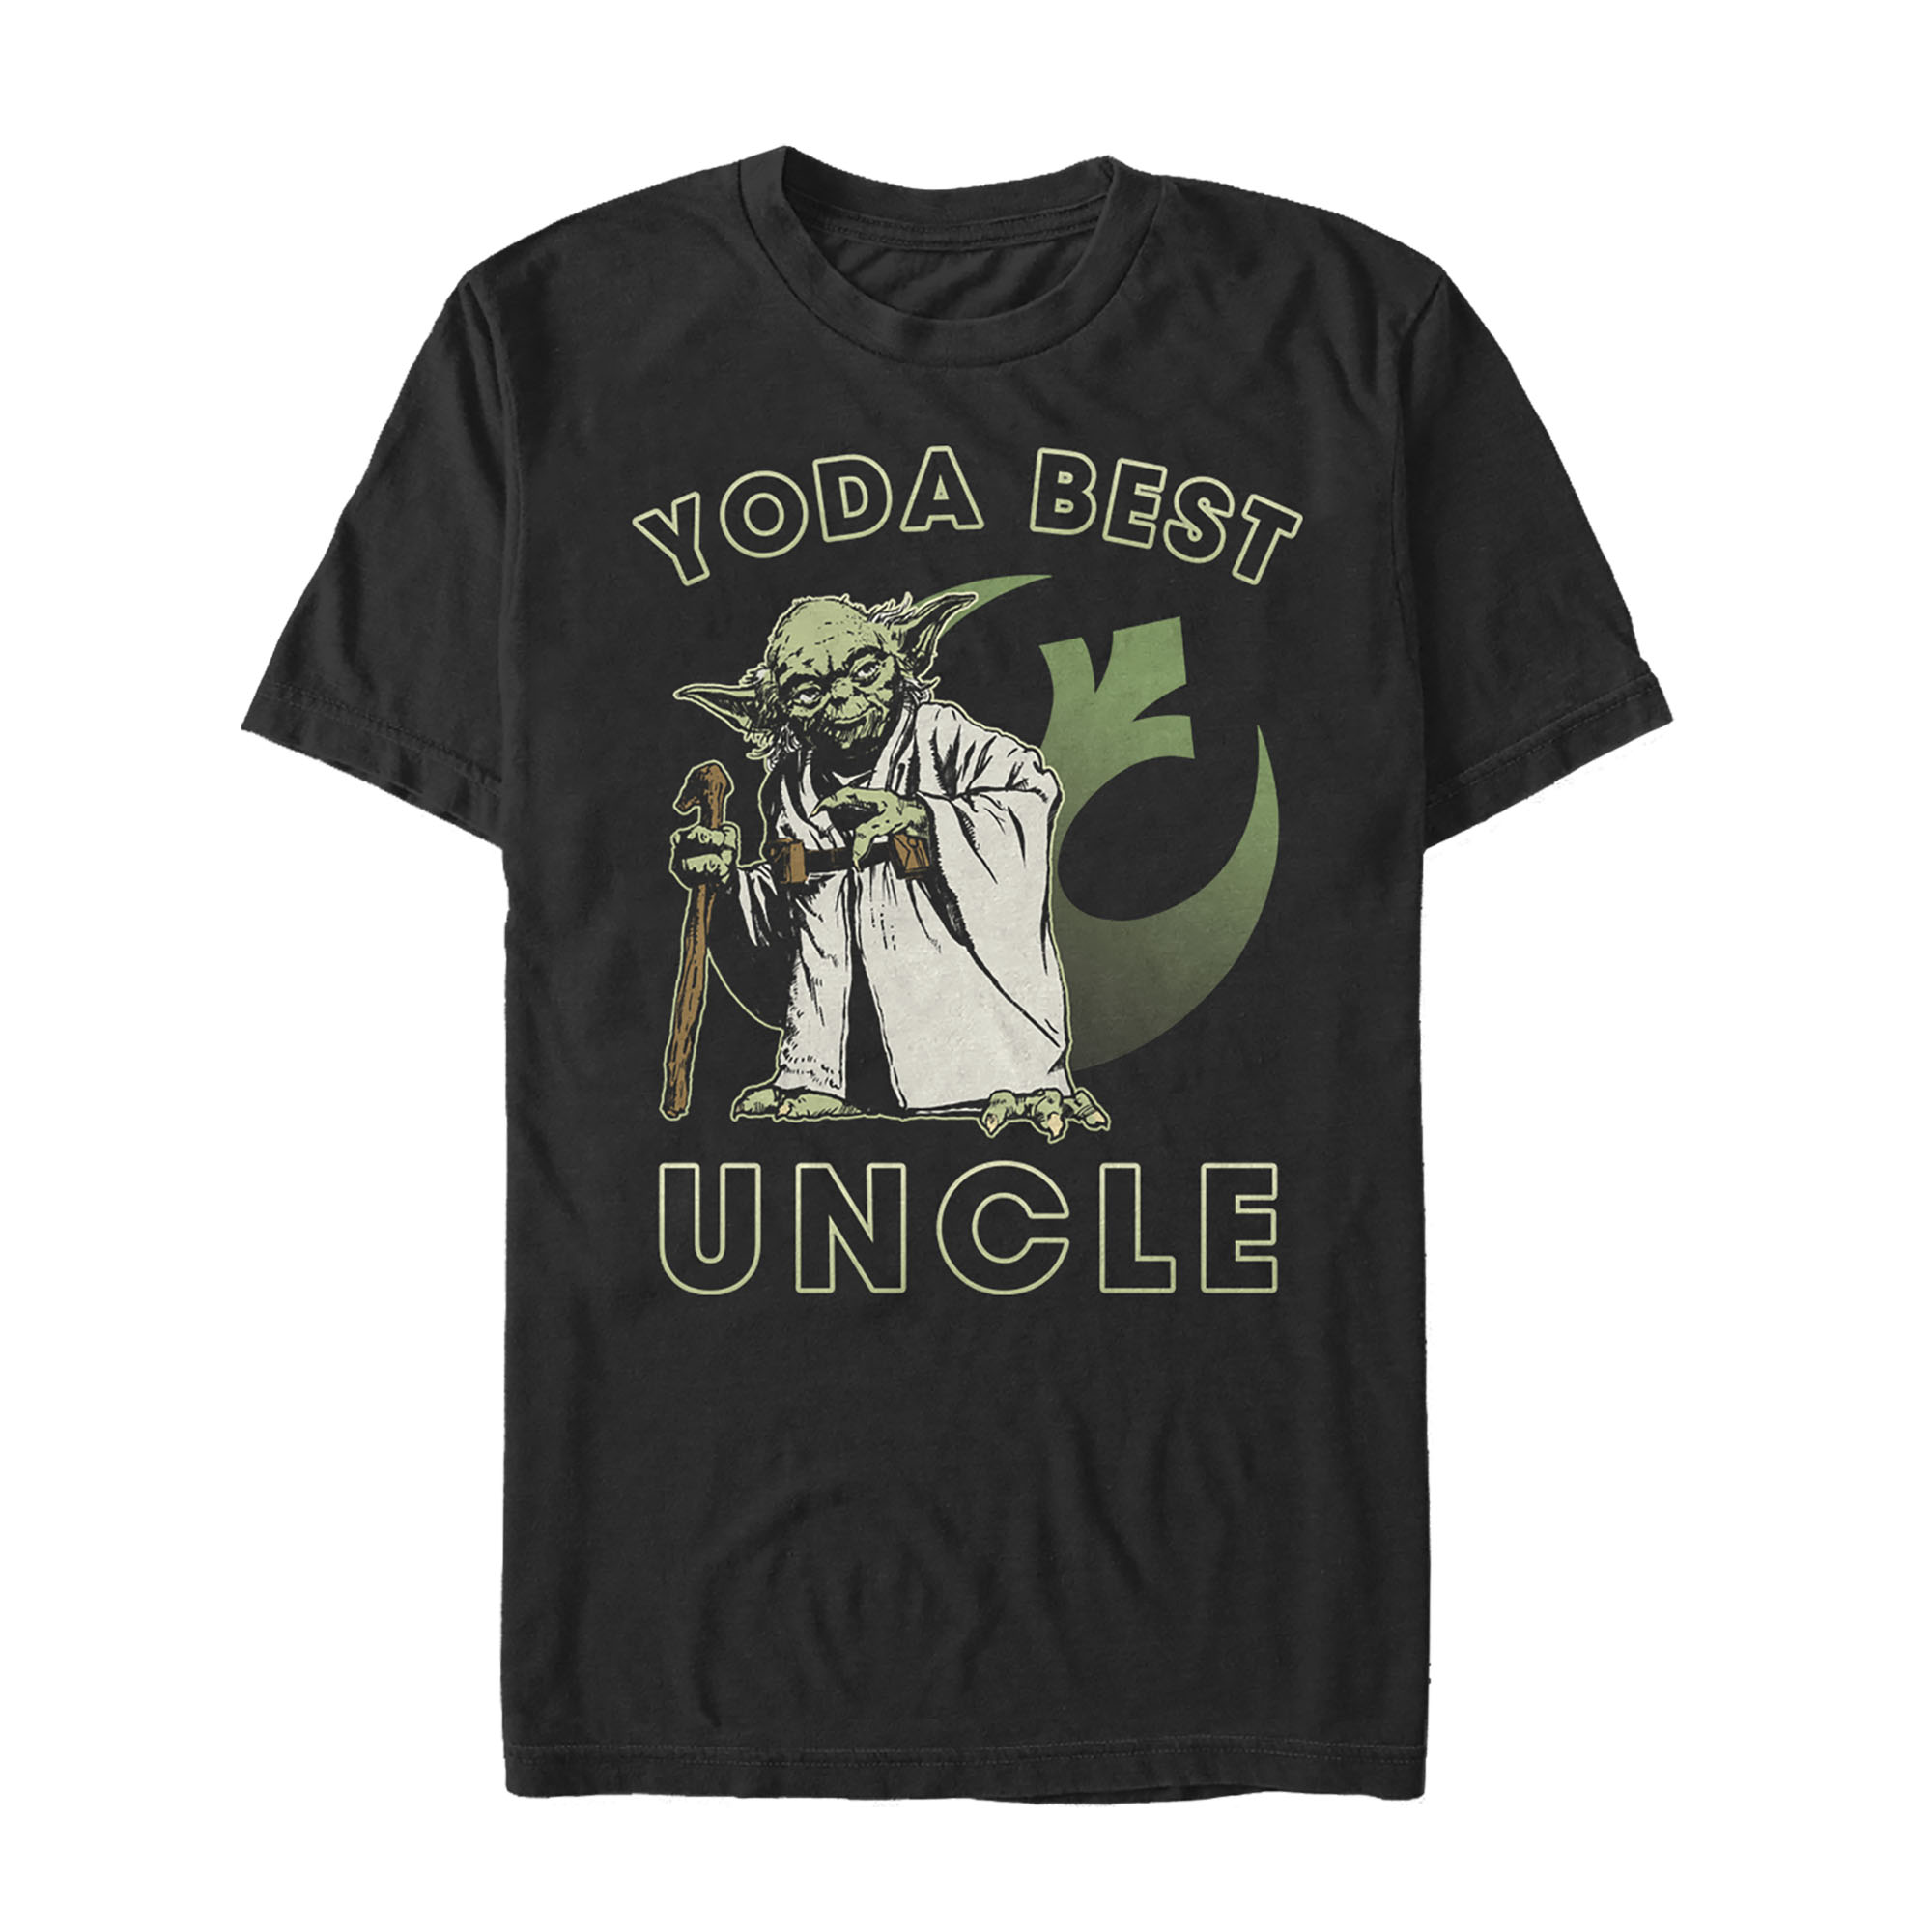 Men's Star Wars Yoda Best Uncle  Graphic Tee Black Large - image 1 of 5